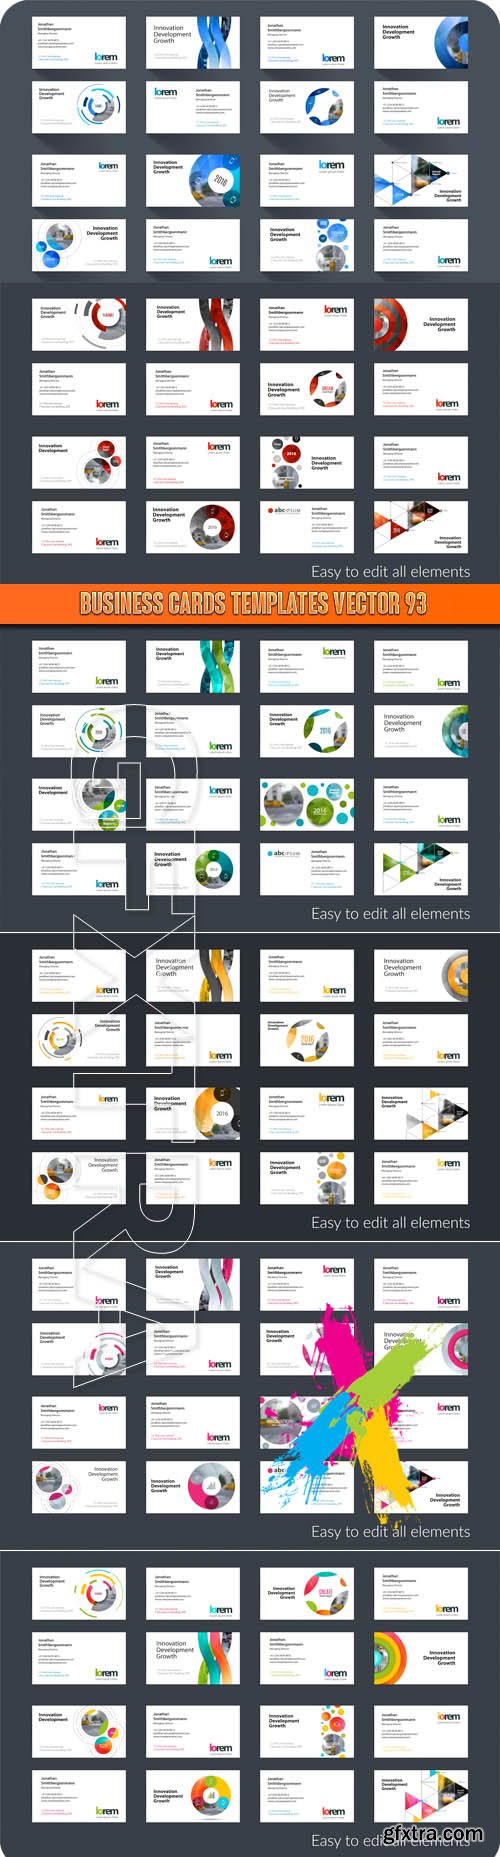 Business Cards Templates vector 93